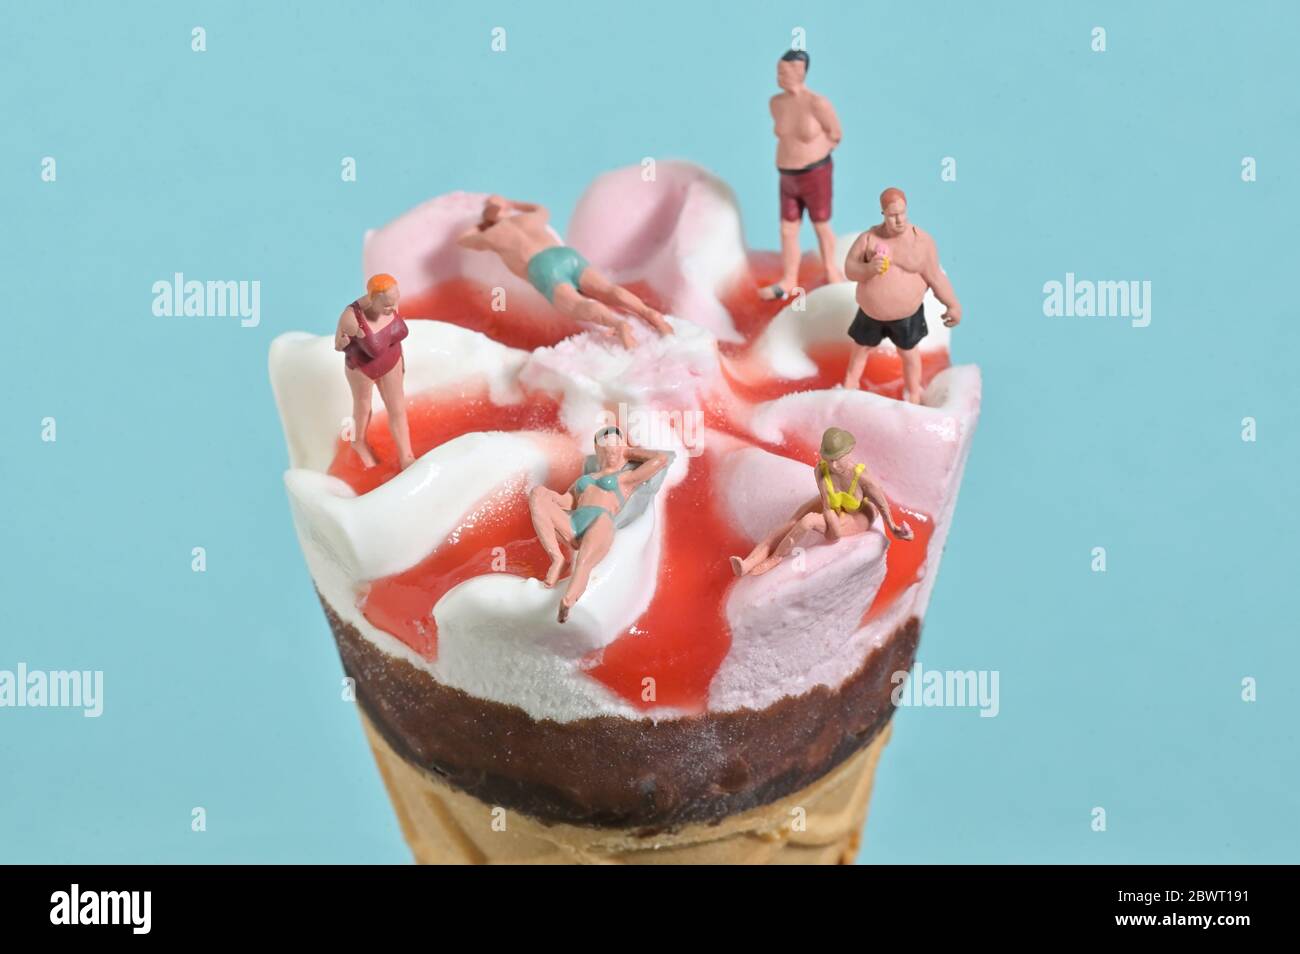 Ice Cream In Waffle Cone and Miniature People on Beach Stock Photo